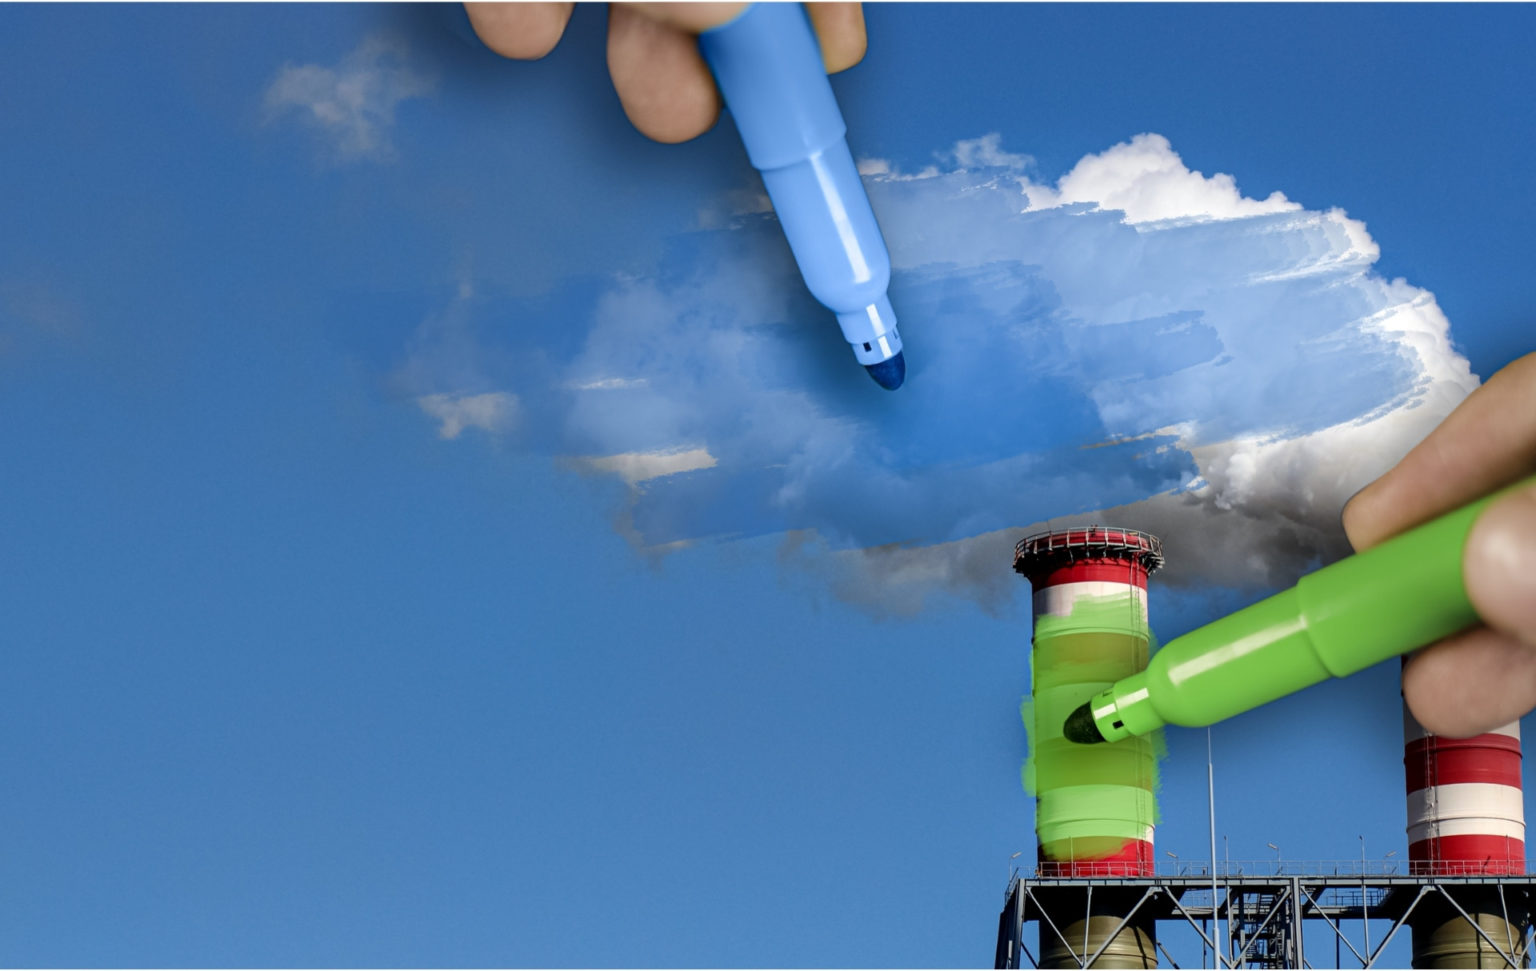 exmpale of greenwashing markers colouring over factory emissions